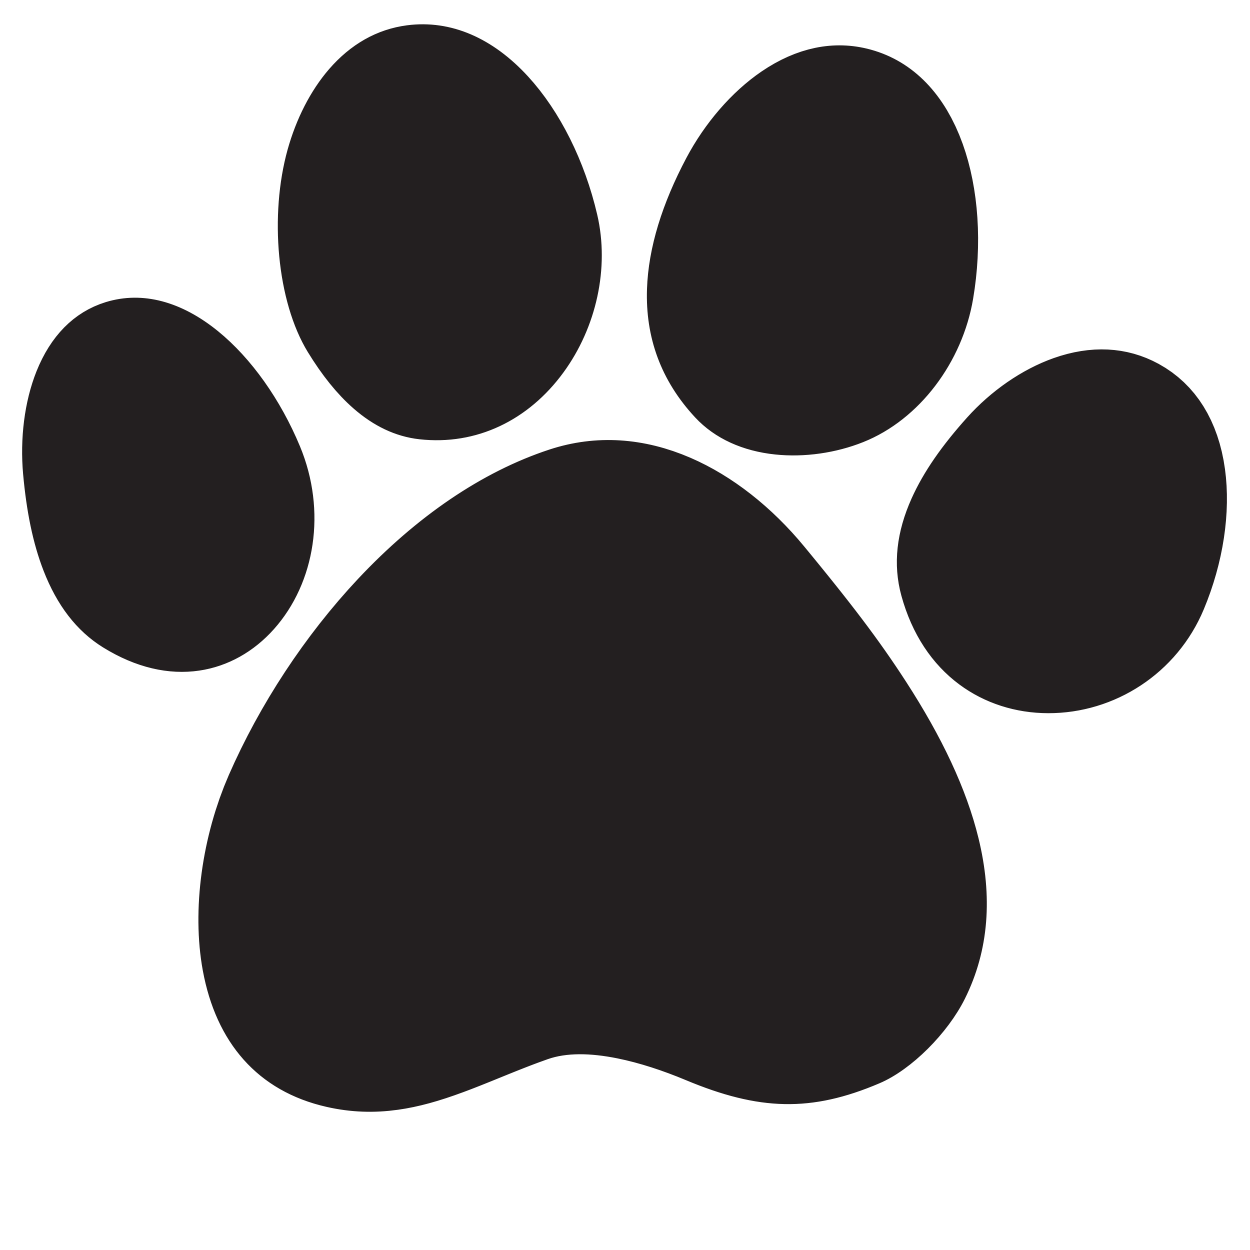 Cat Paws PNG HD - 146328